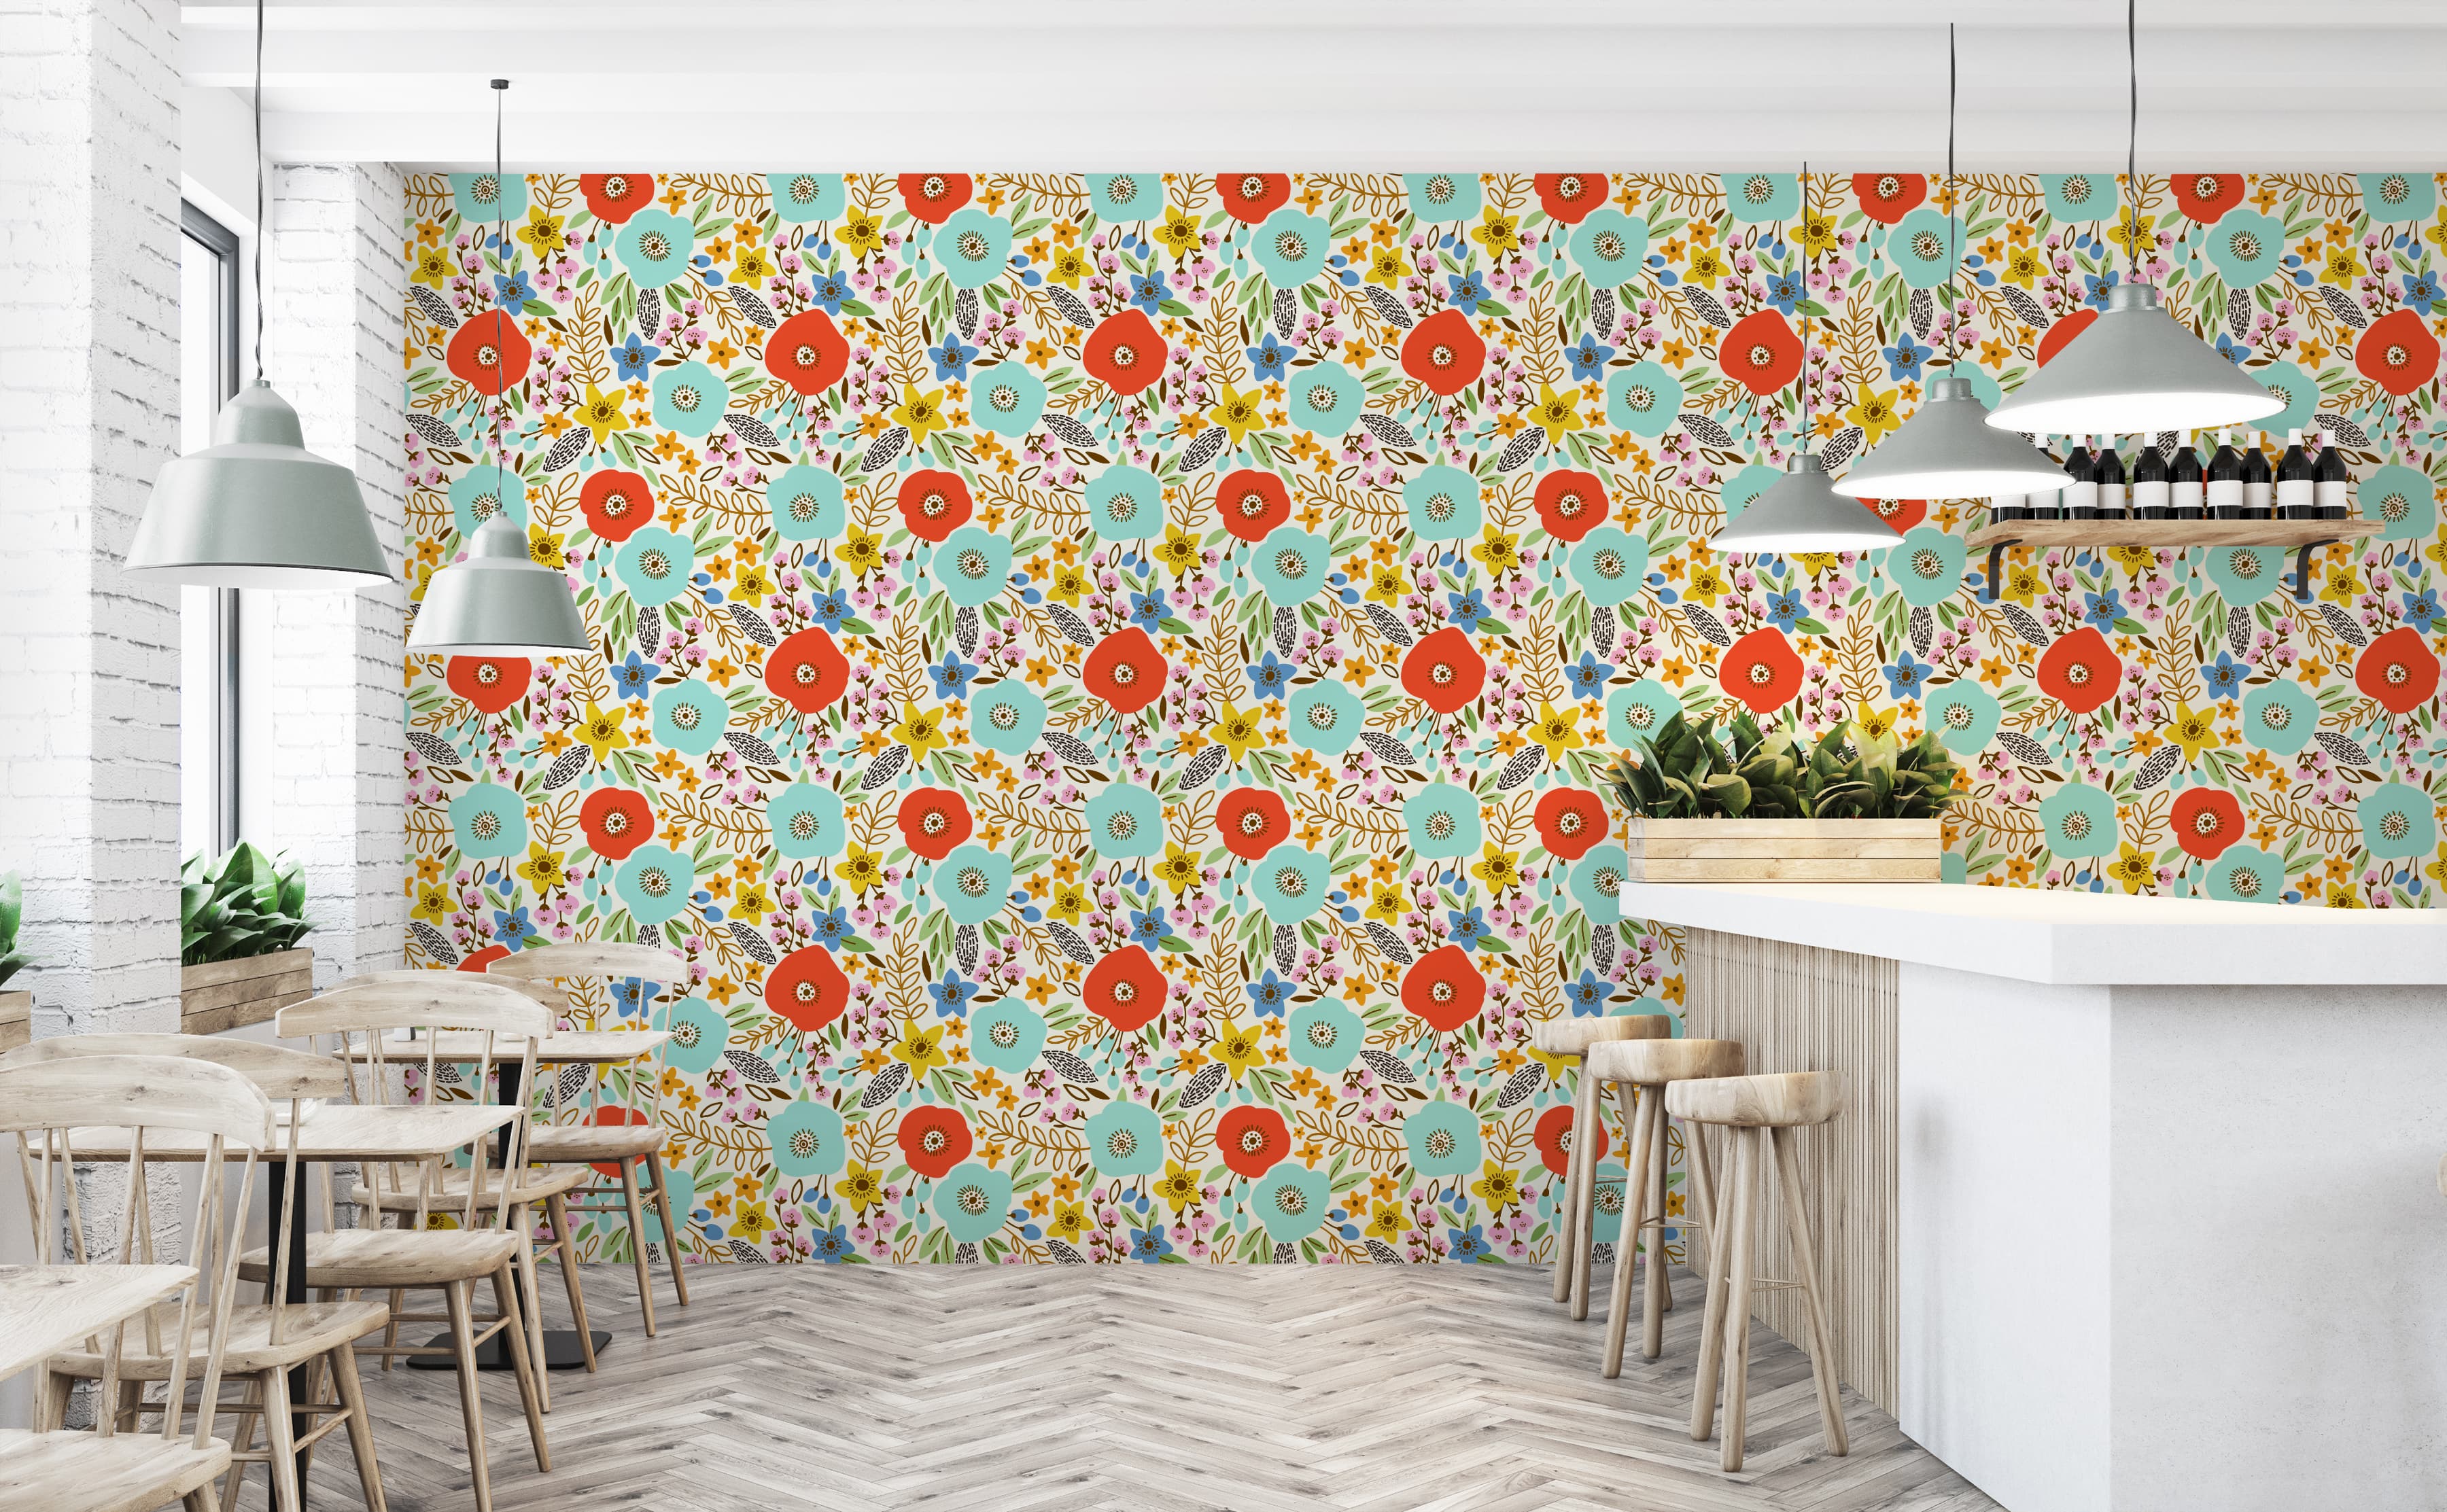 2668515 Modern Floral Pattern Images Stock Photos  Vectors   Shutterstock